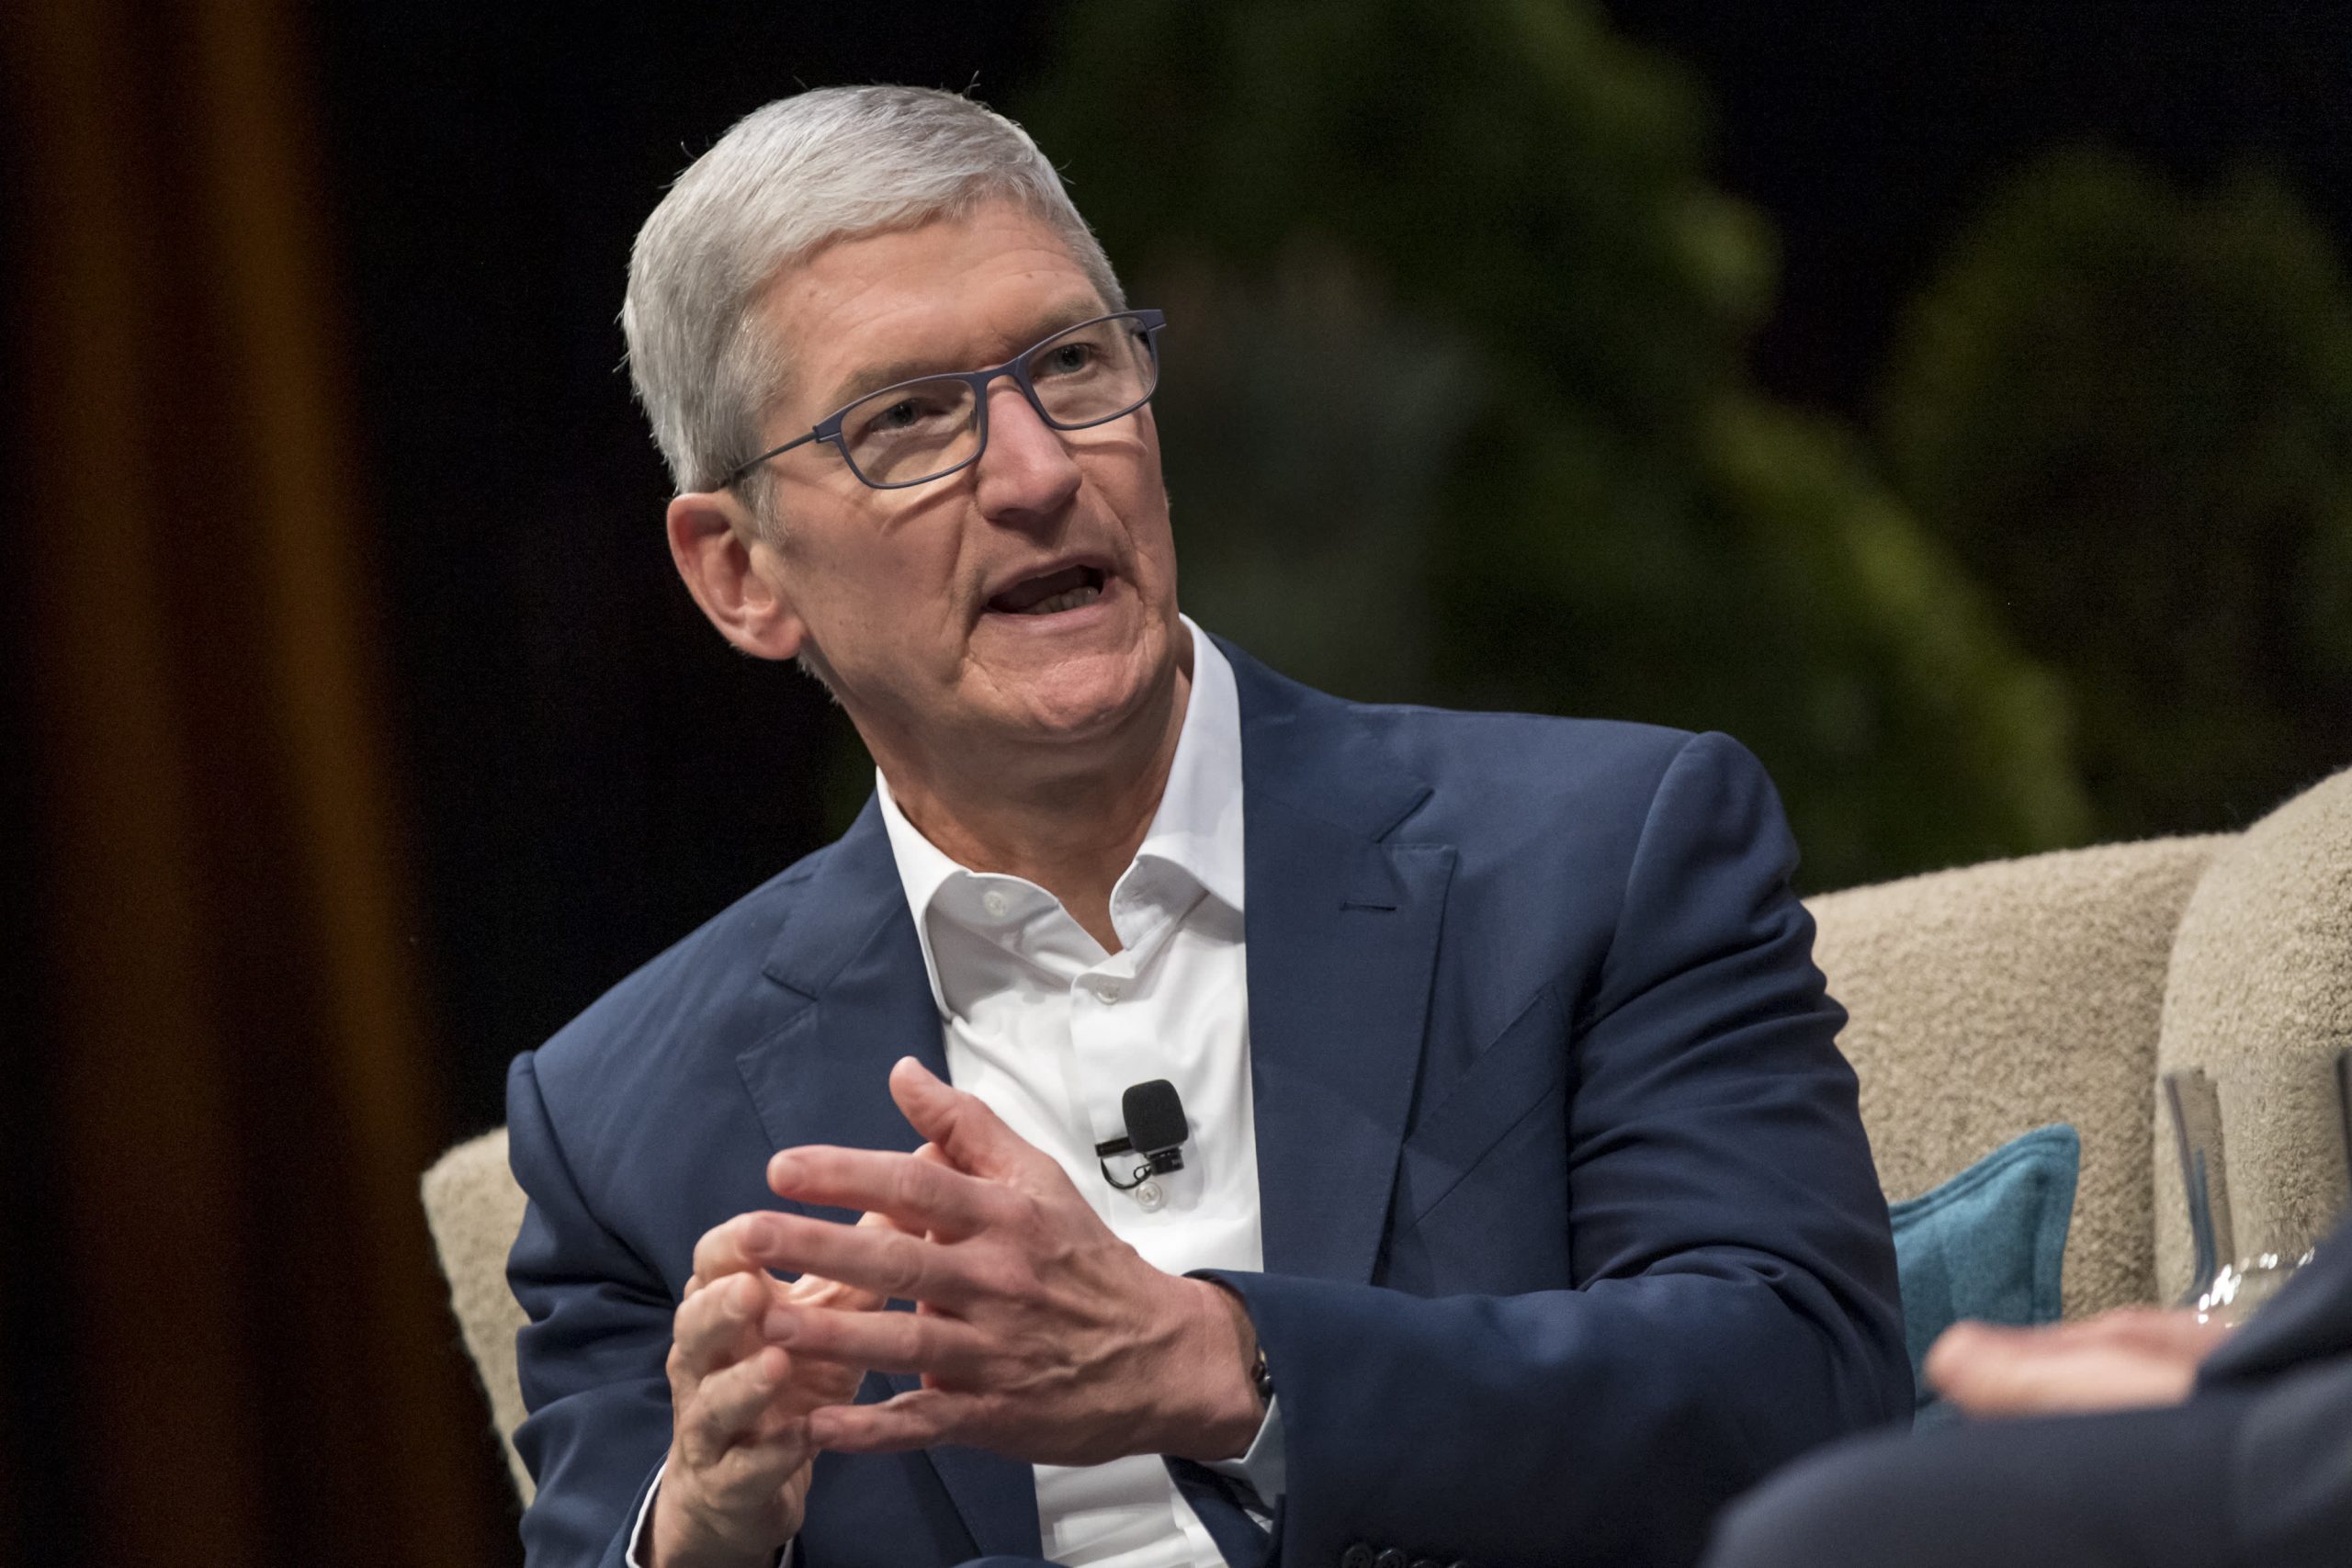 Apple CEO Tim Cook says no one involved in the Capitol insurrection is above the law